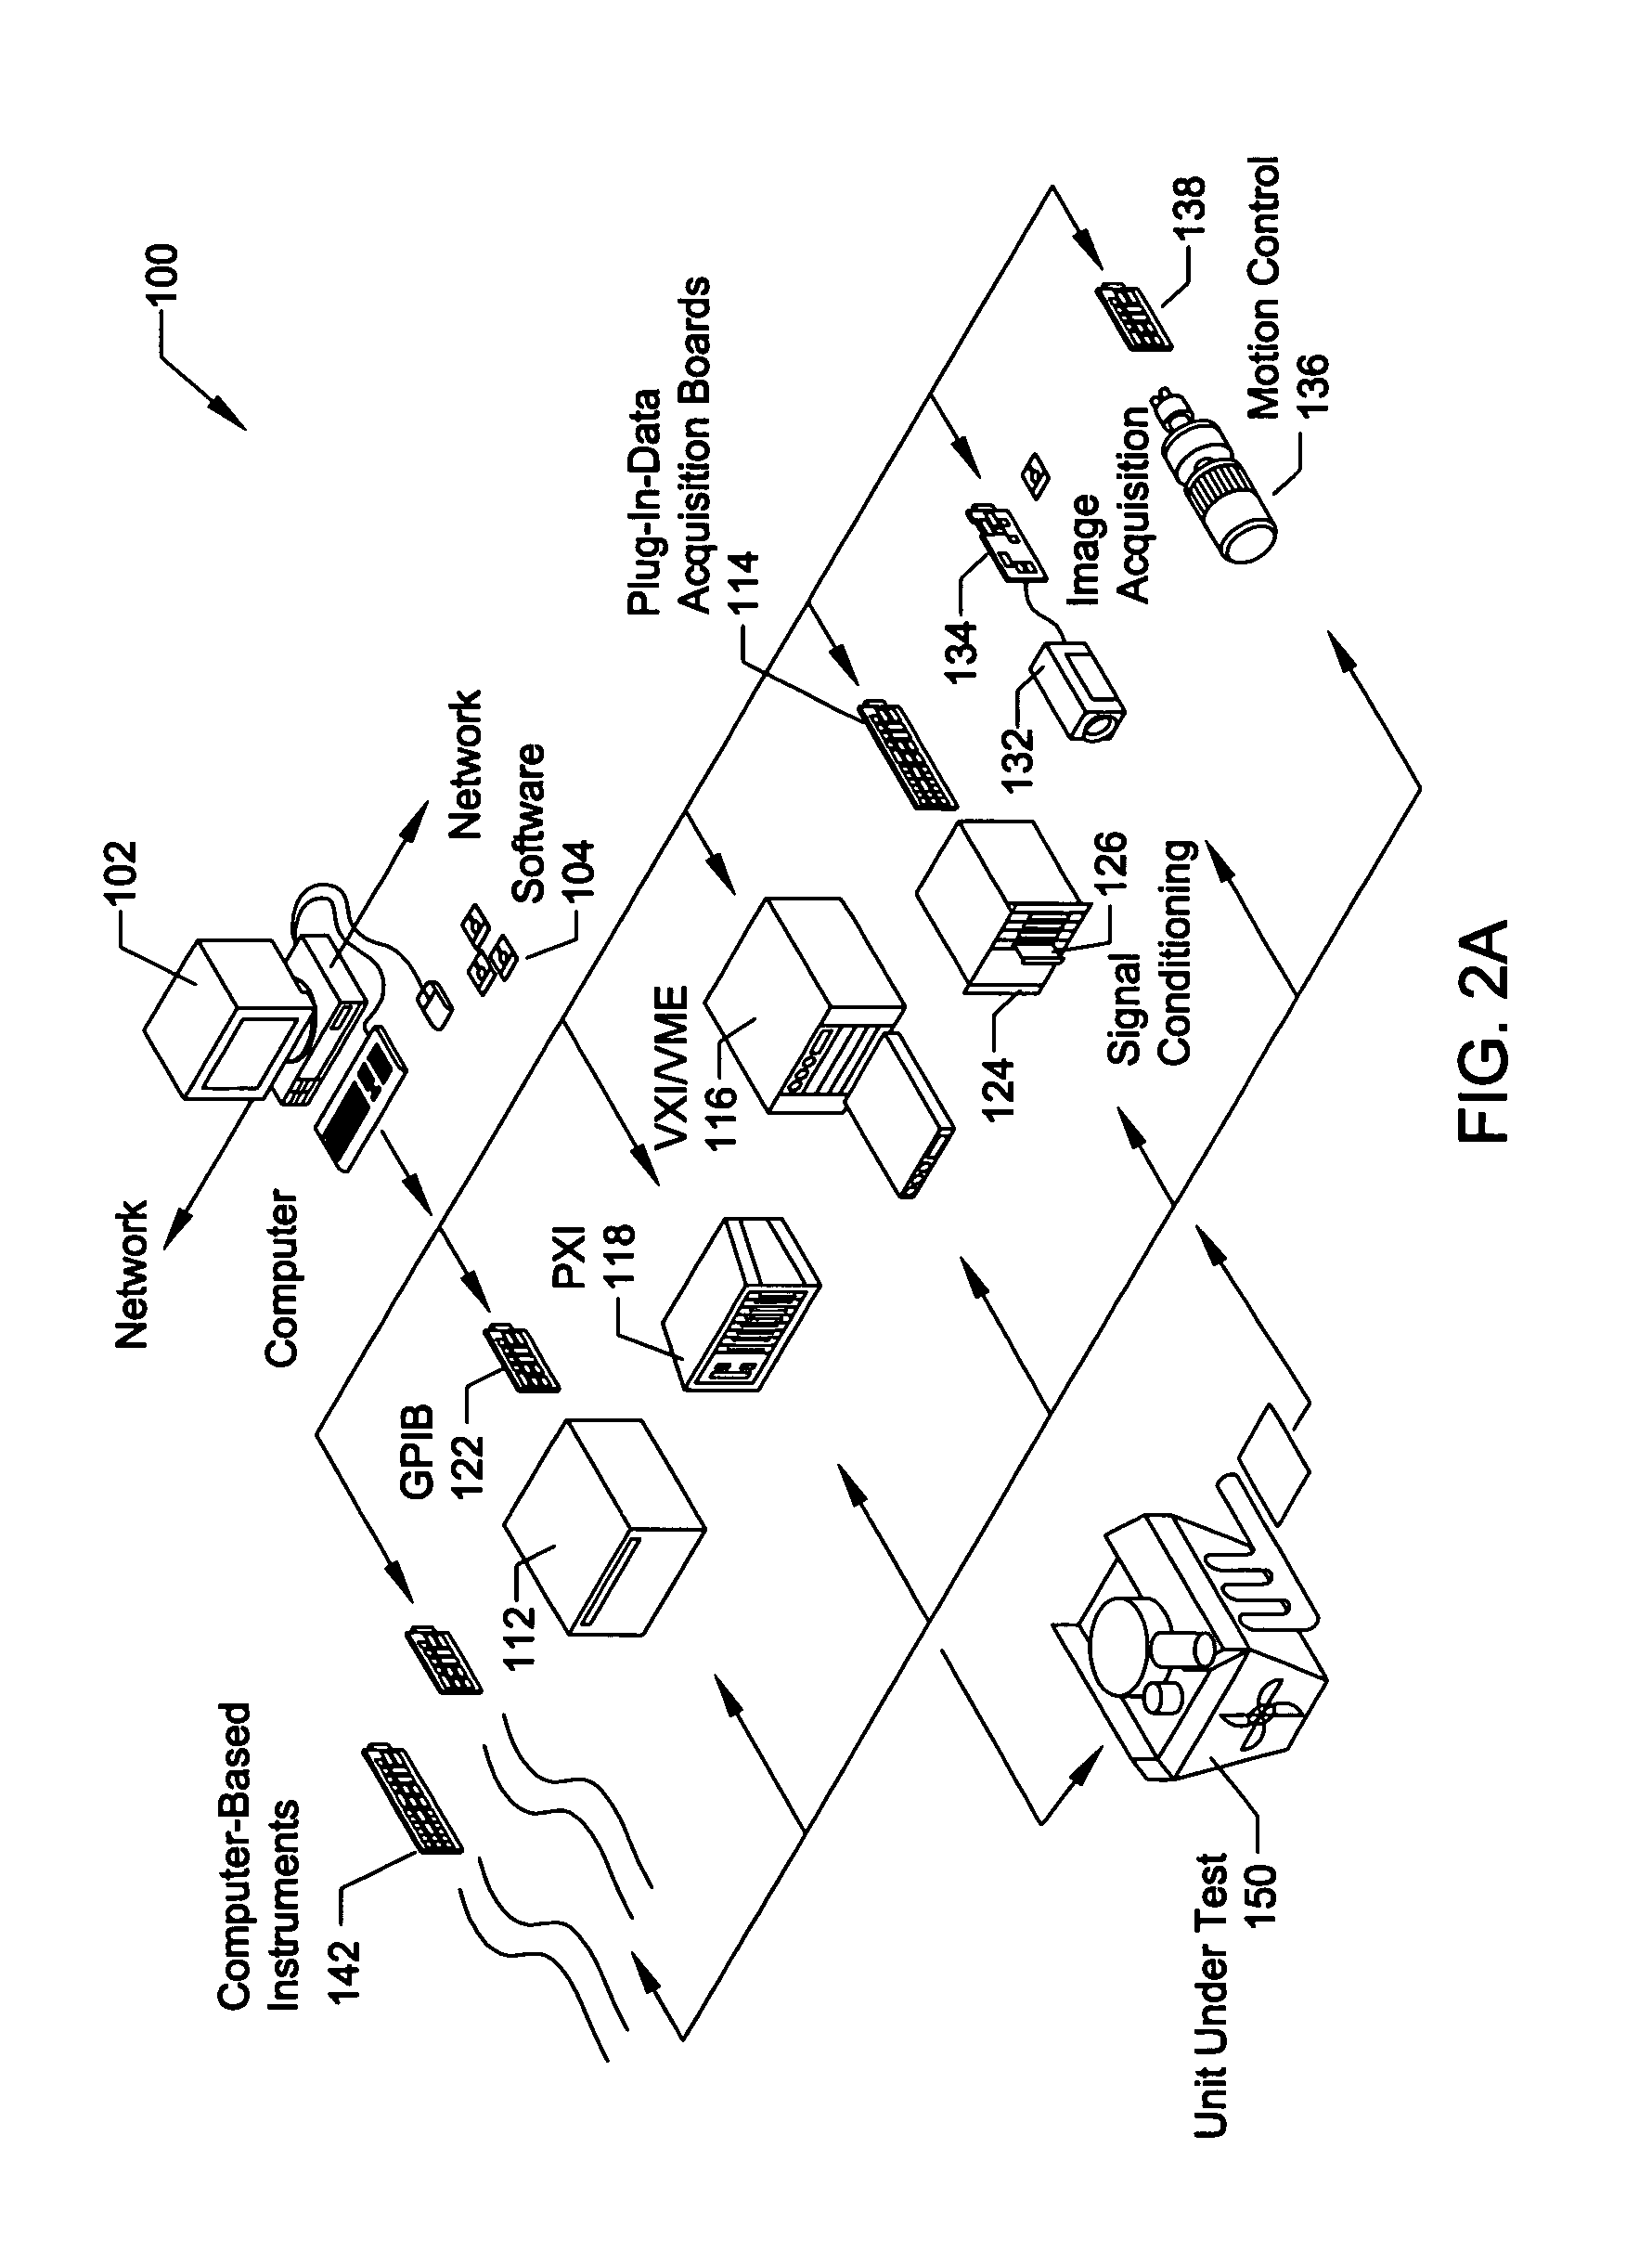 System and method for programmatically generating a graphical program in response to program information